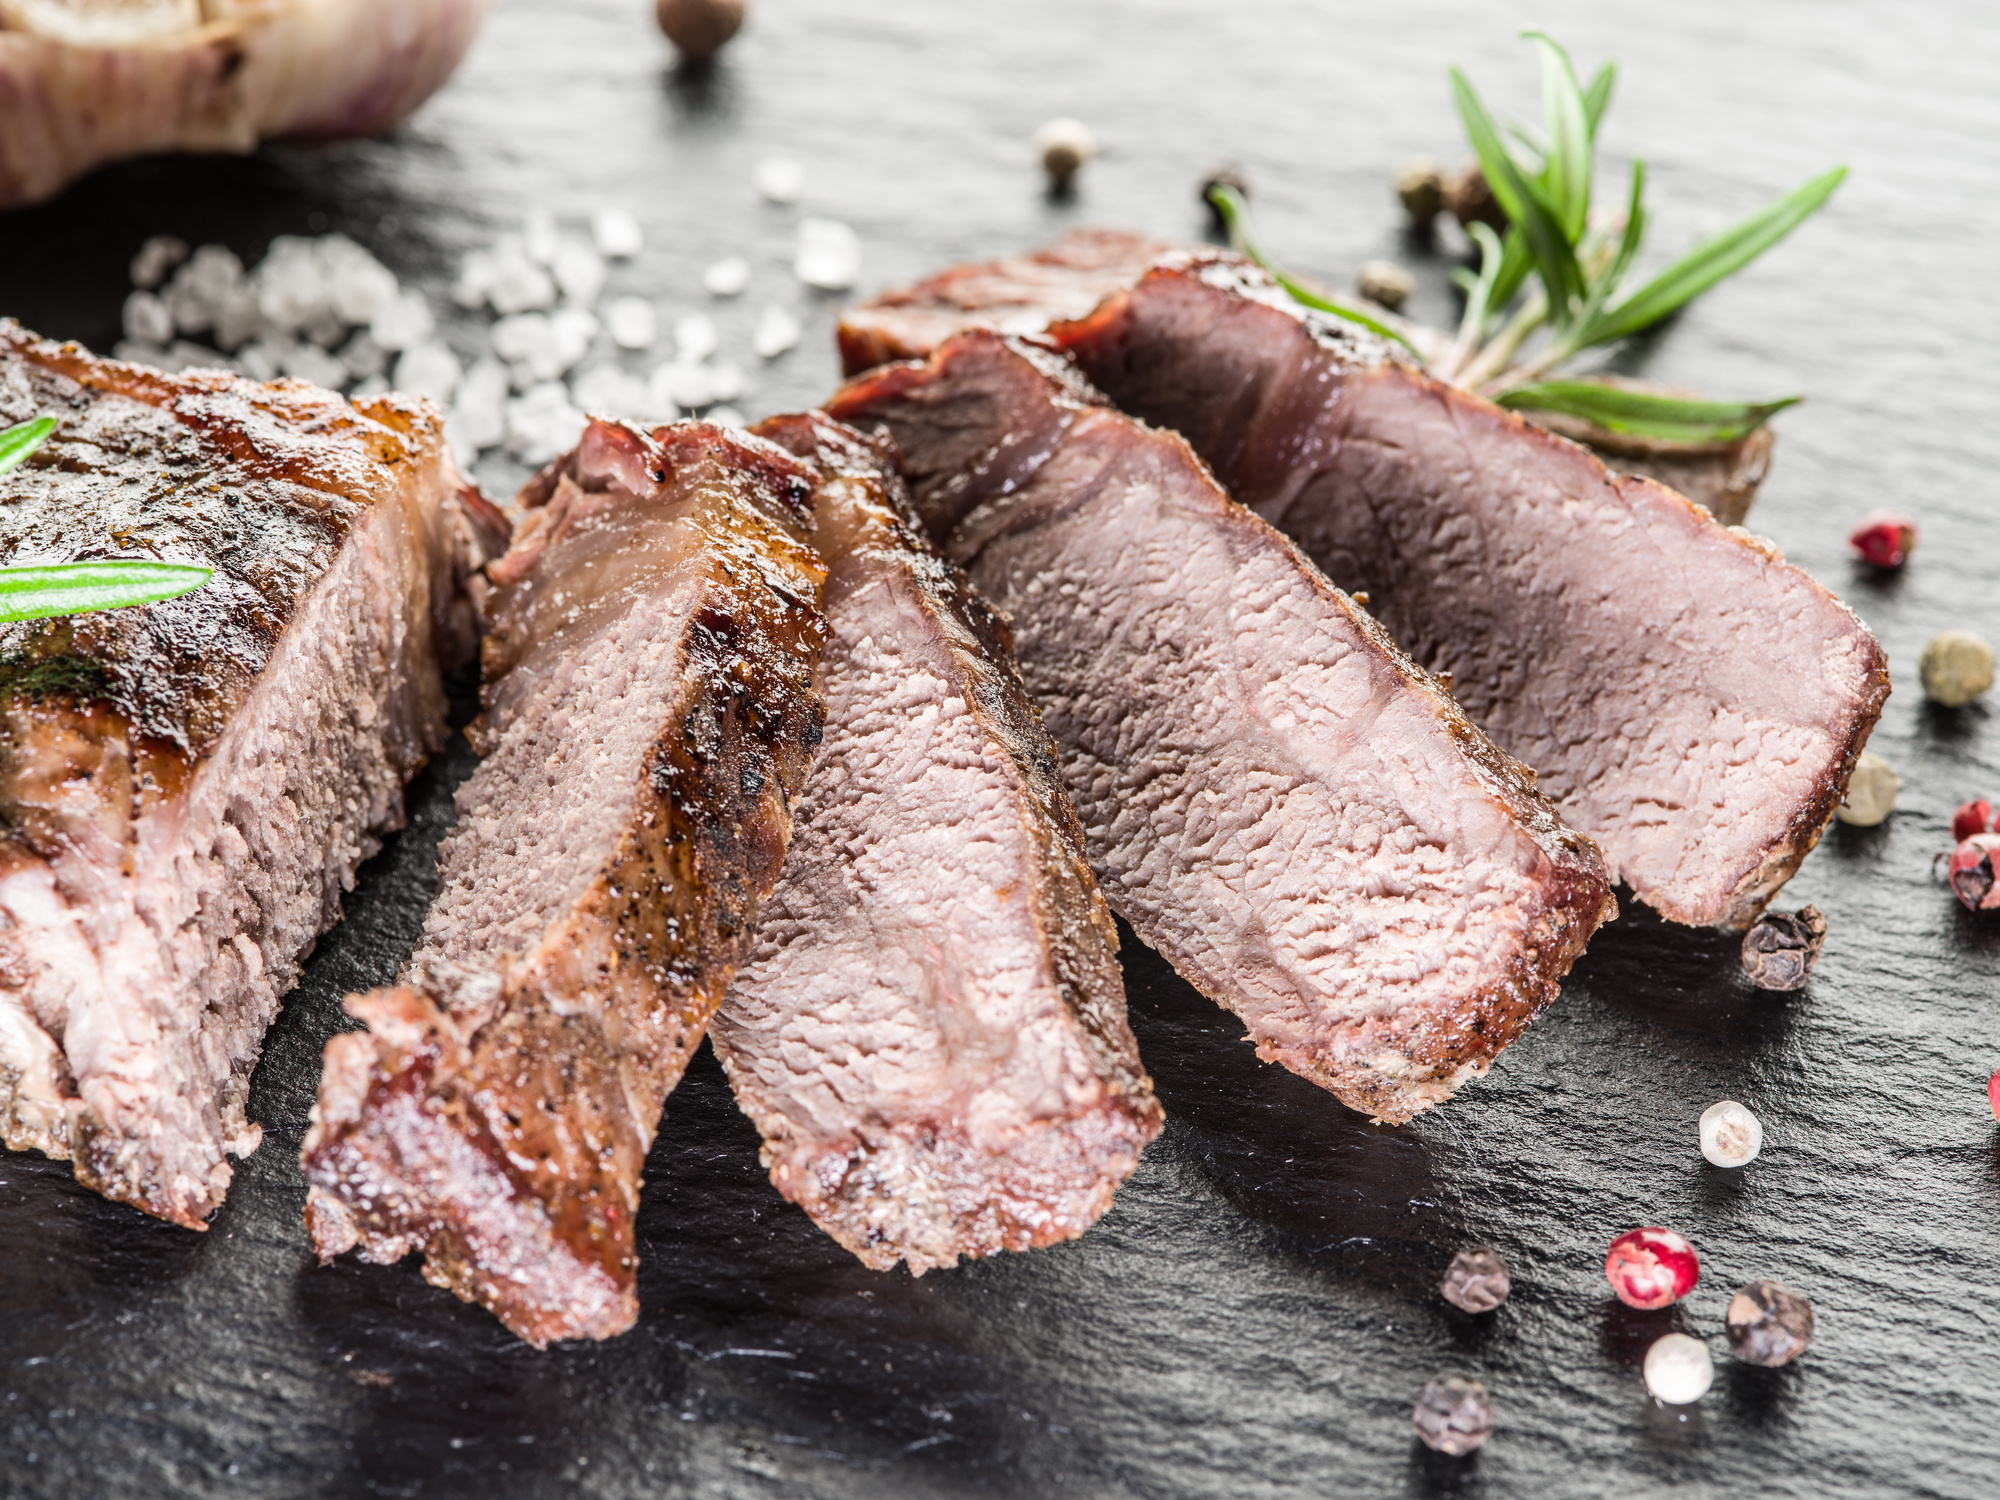 Which is Healthier: Rare or Well-Done Steak?